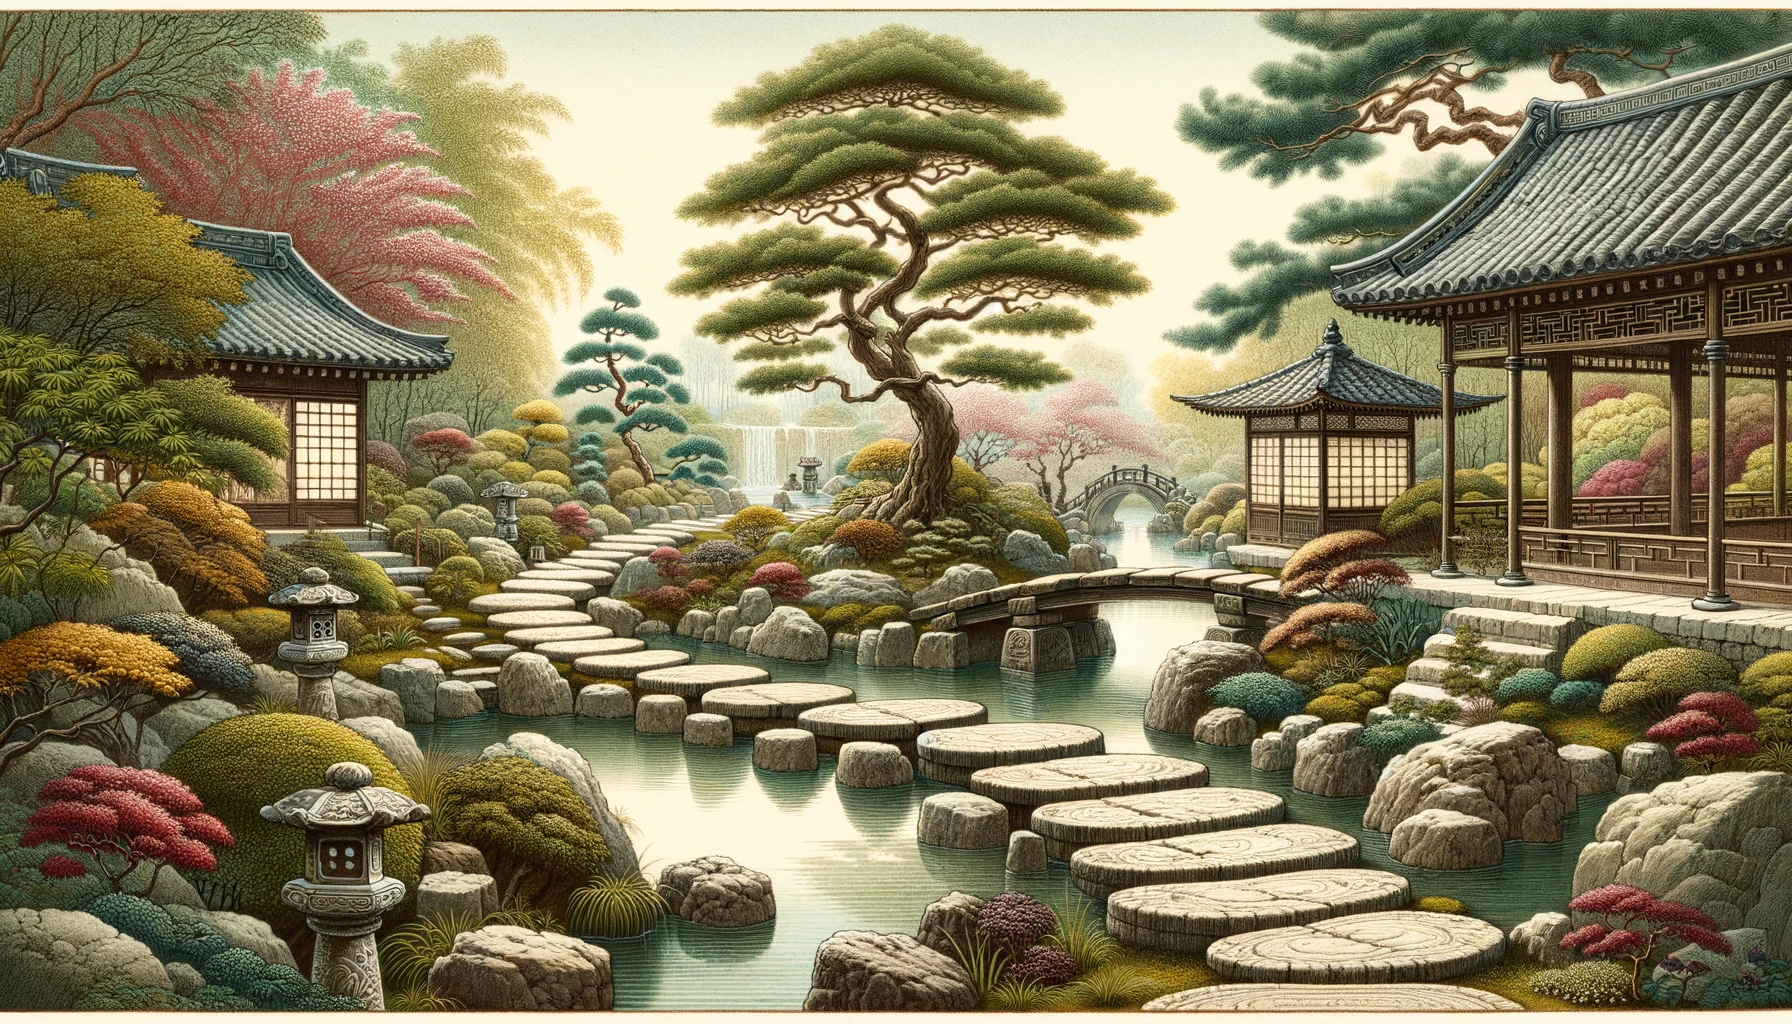 Stepping Stones in Ancient Japan and China